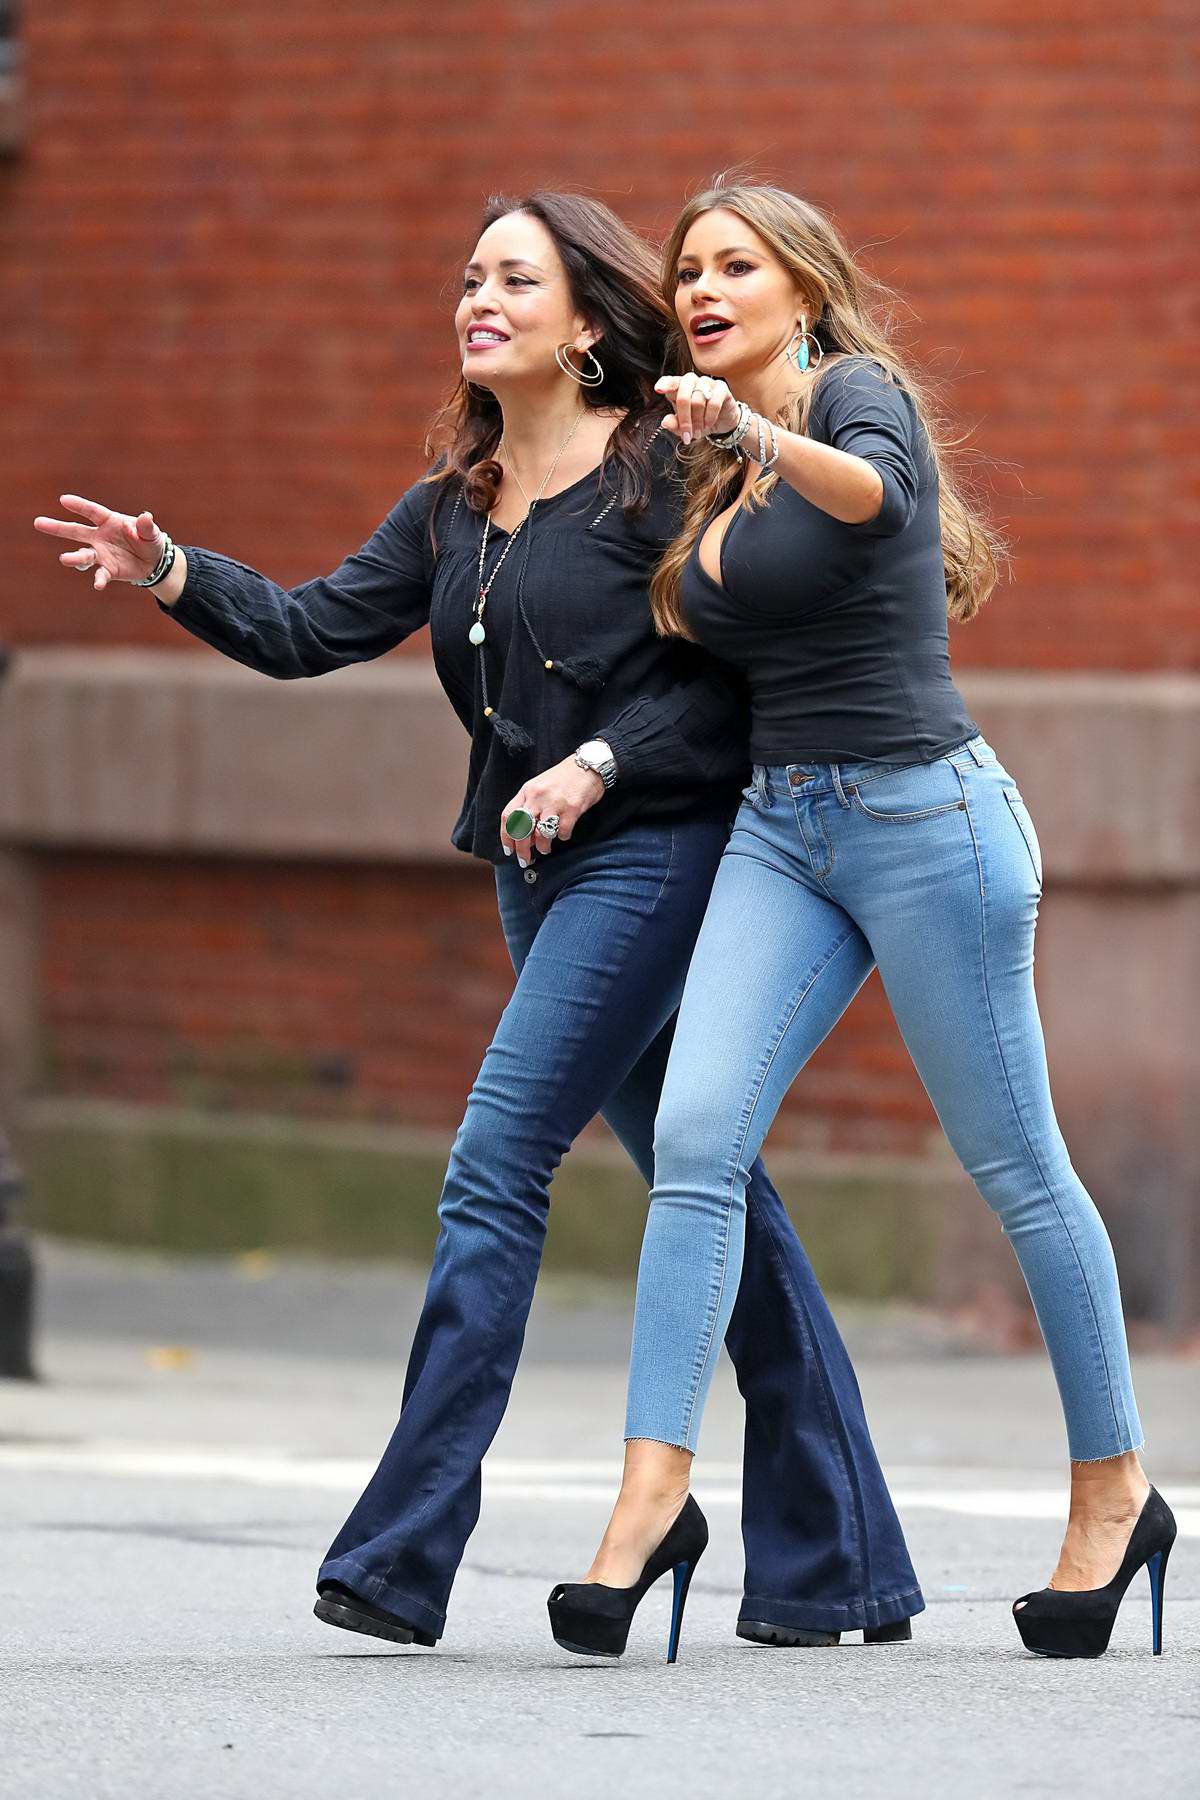 sofia vergara seen wearing a formfitting top, skinny jeans with platform heels  while directing a photoshoot in new york city-261018_4